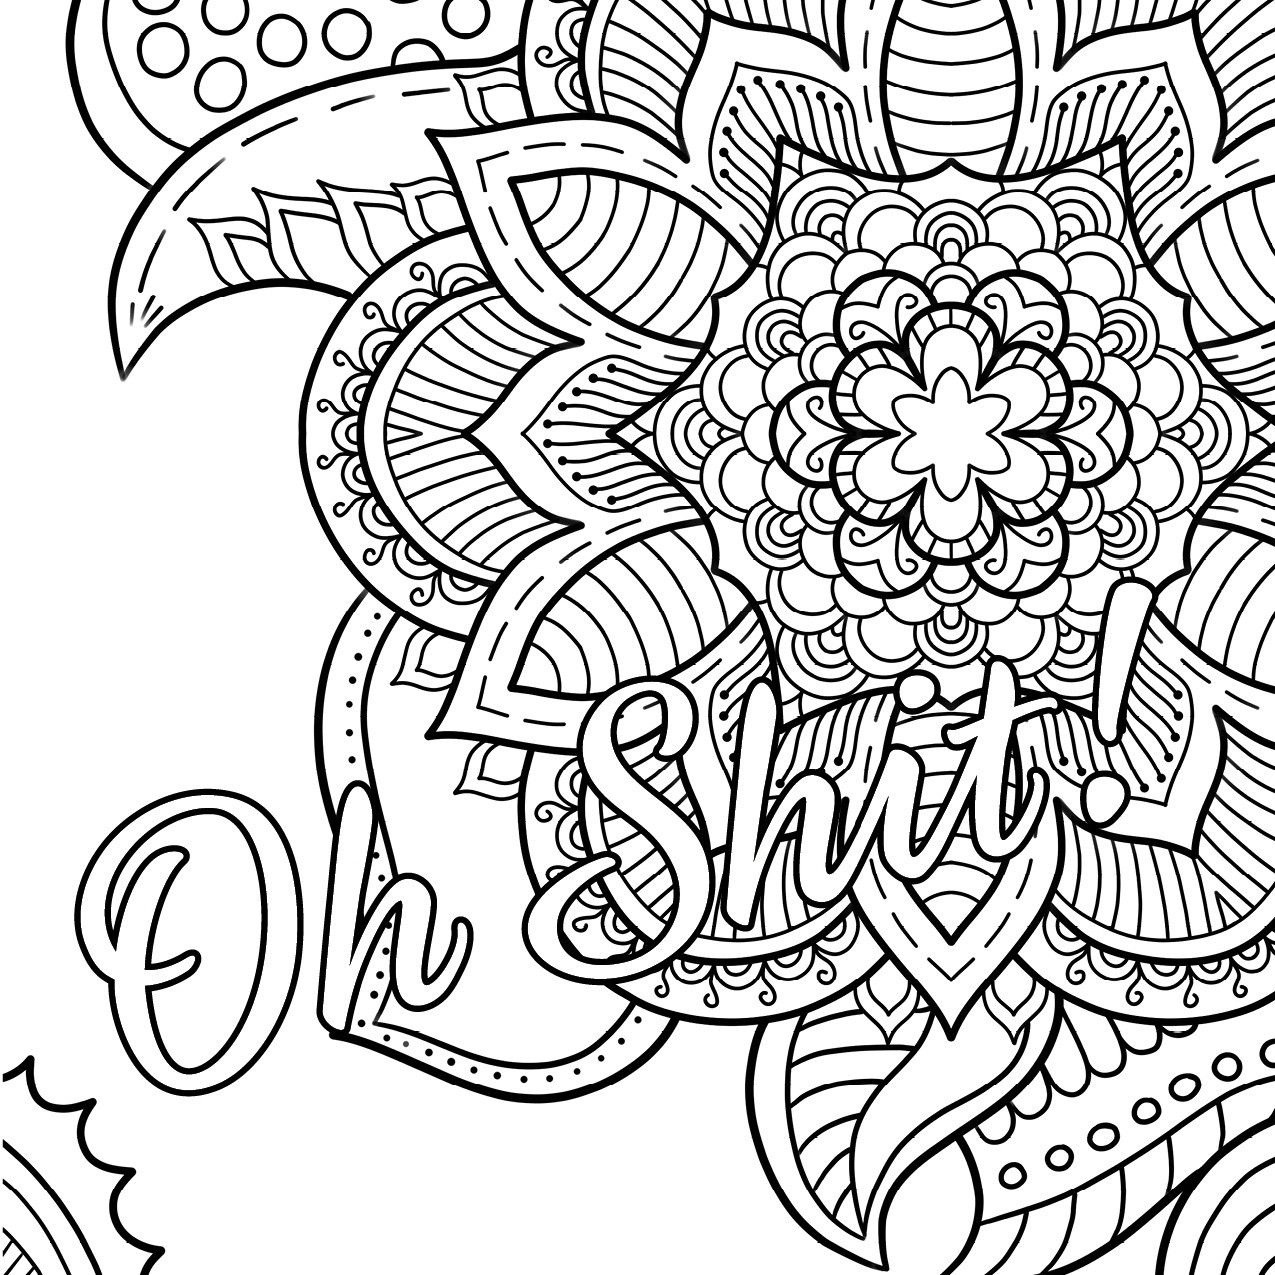 Swear Word Coloring Book #2 Free Printable Coloring Pages For Adults - Free Printable Coloring Book Pages For Adults